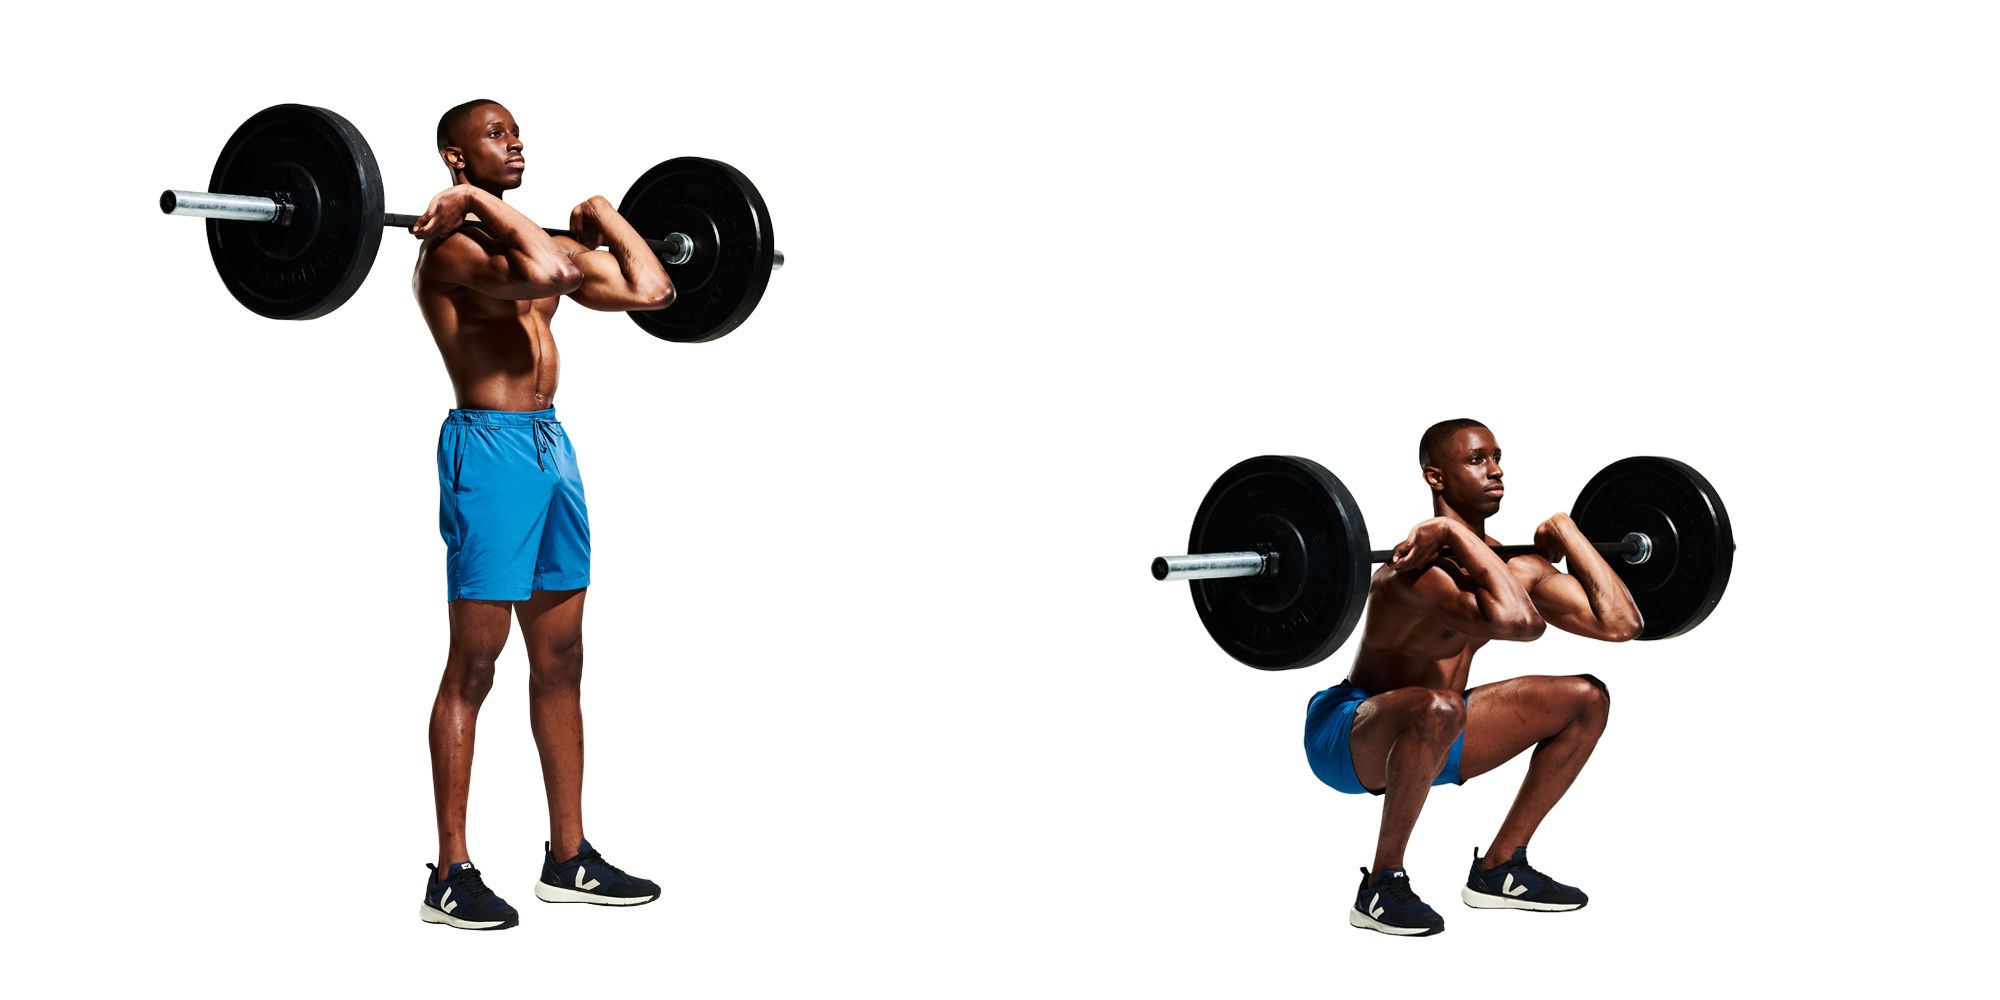 How to Do Squats: Benefits, Tips, and Step-by-Step Instructions